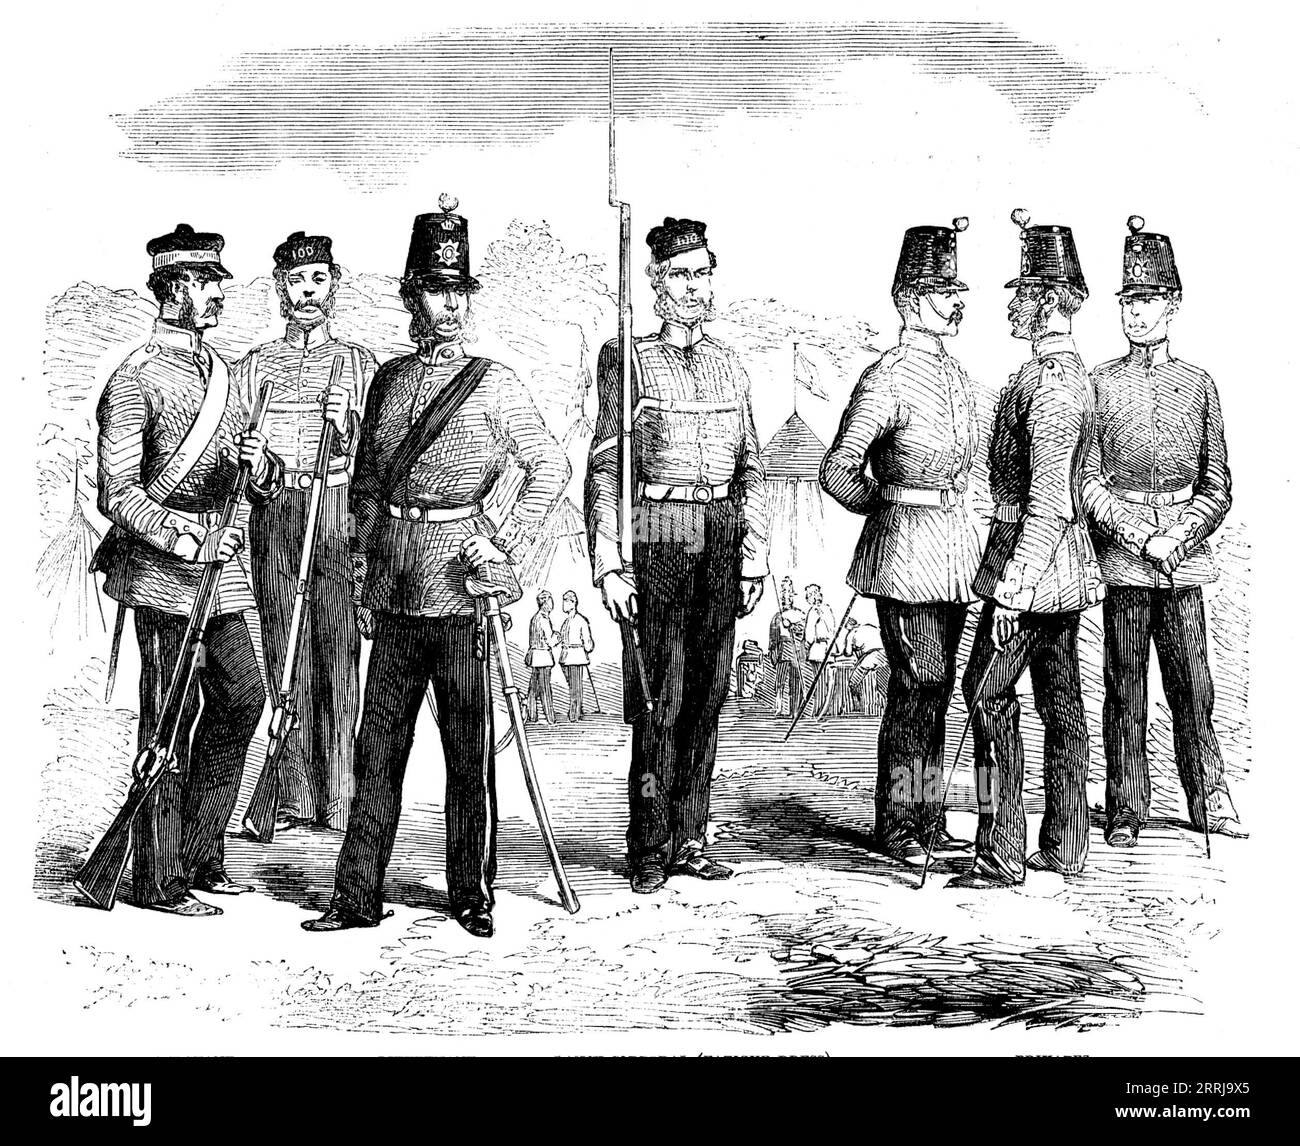 The 100th (Prince of Wales' Royal Canadian) Regiment of the Line, 1858. 'We have recently had two interesting arrivals to the shores of England - the first and second detachments of a new regiment of the Line formed in Canada. When the mother country was under the pressure of the great Indian rebellion Canada offered to raise a regiment and place it at the disposal of the Government. The offer was cordially accepted, and in an incredibly short space of time a regiment, recruited entirely in Canada, was enrolled and completed...it is numbered the Hundredth Regiment of Foot, and is inscribed in Stock Photo